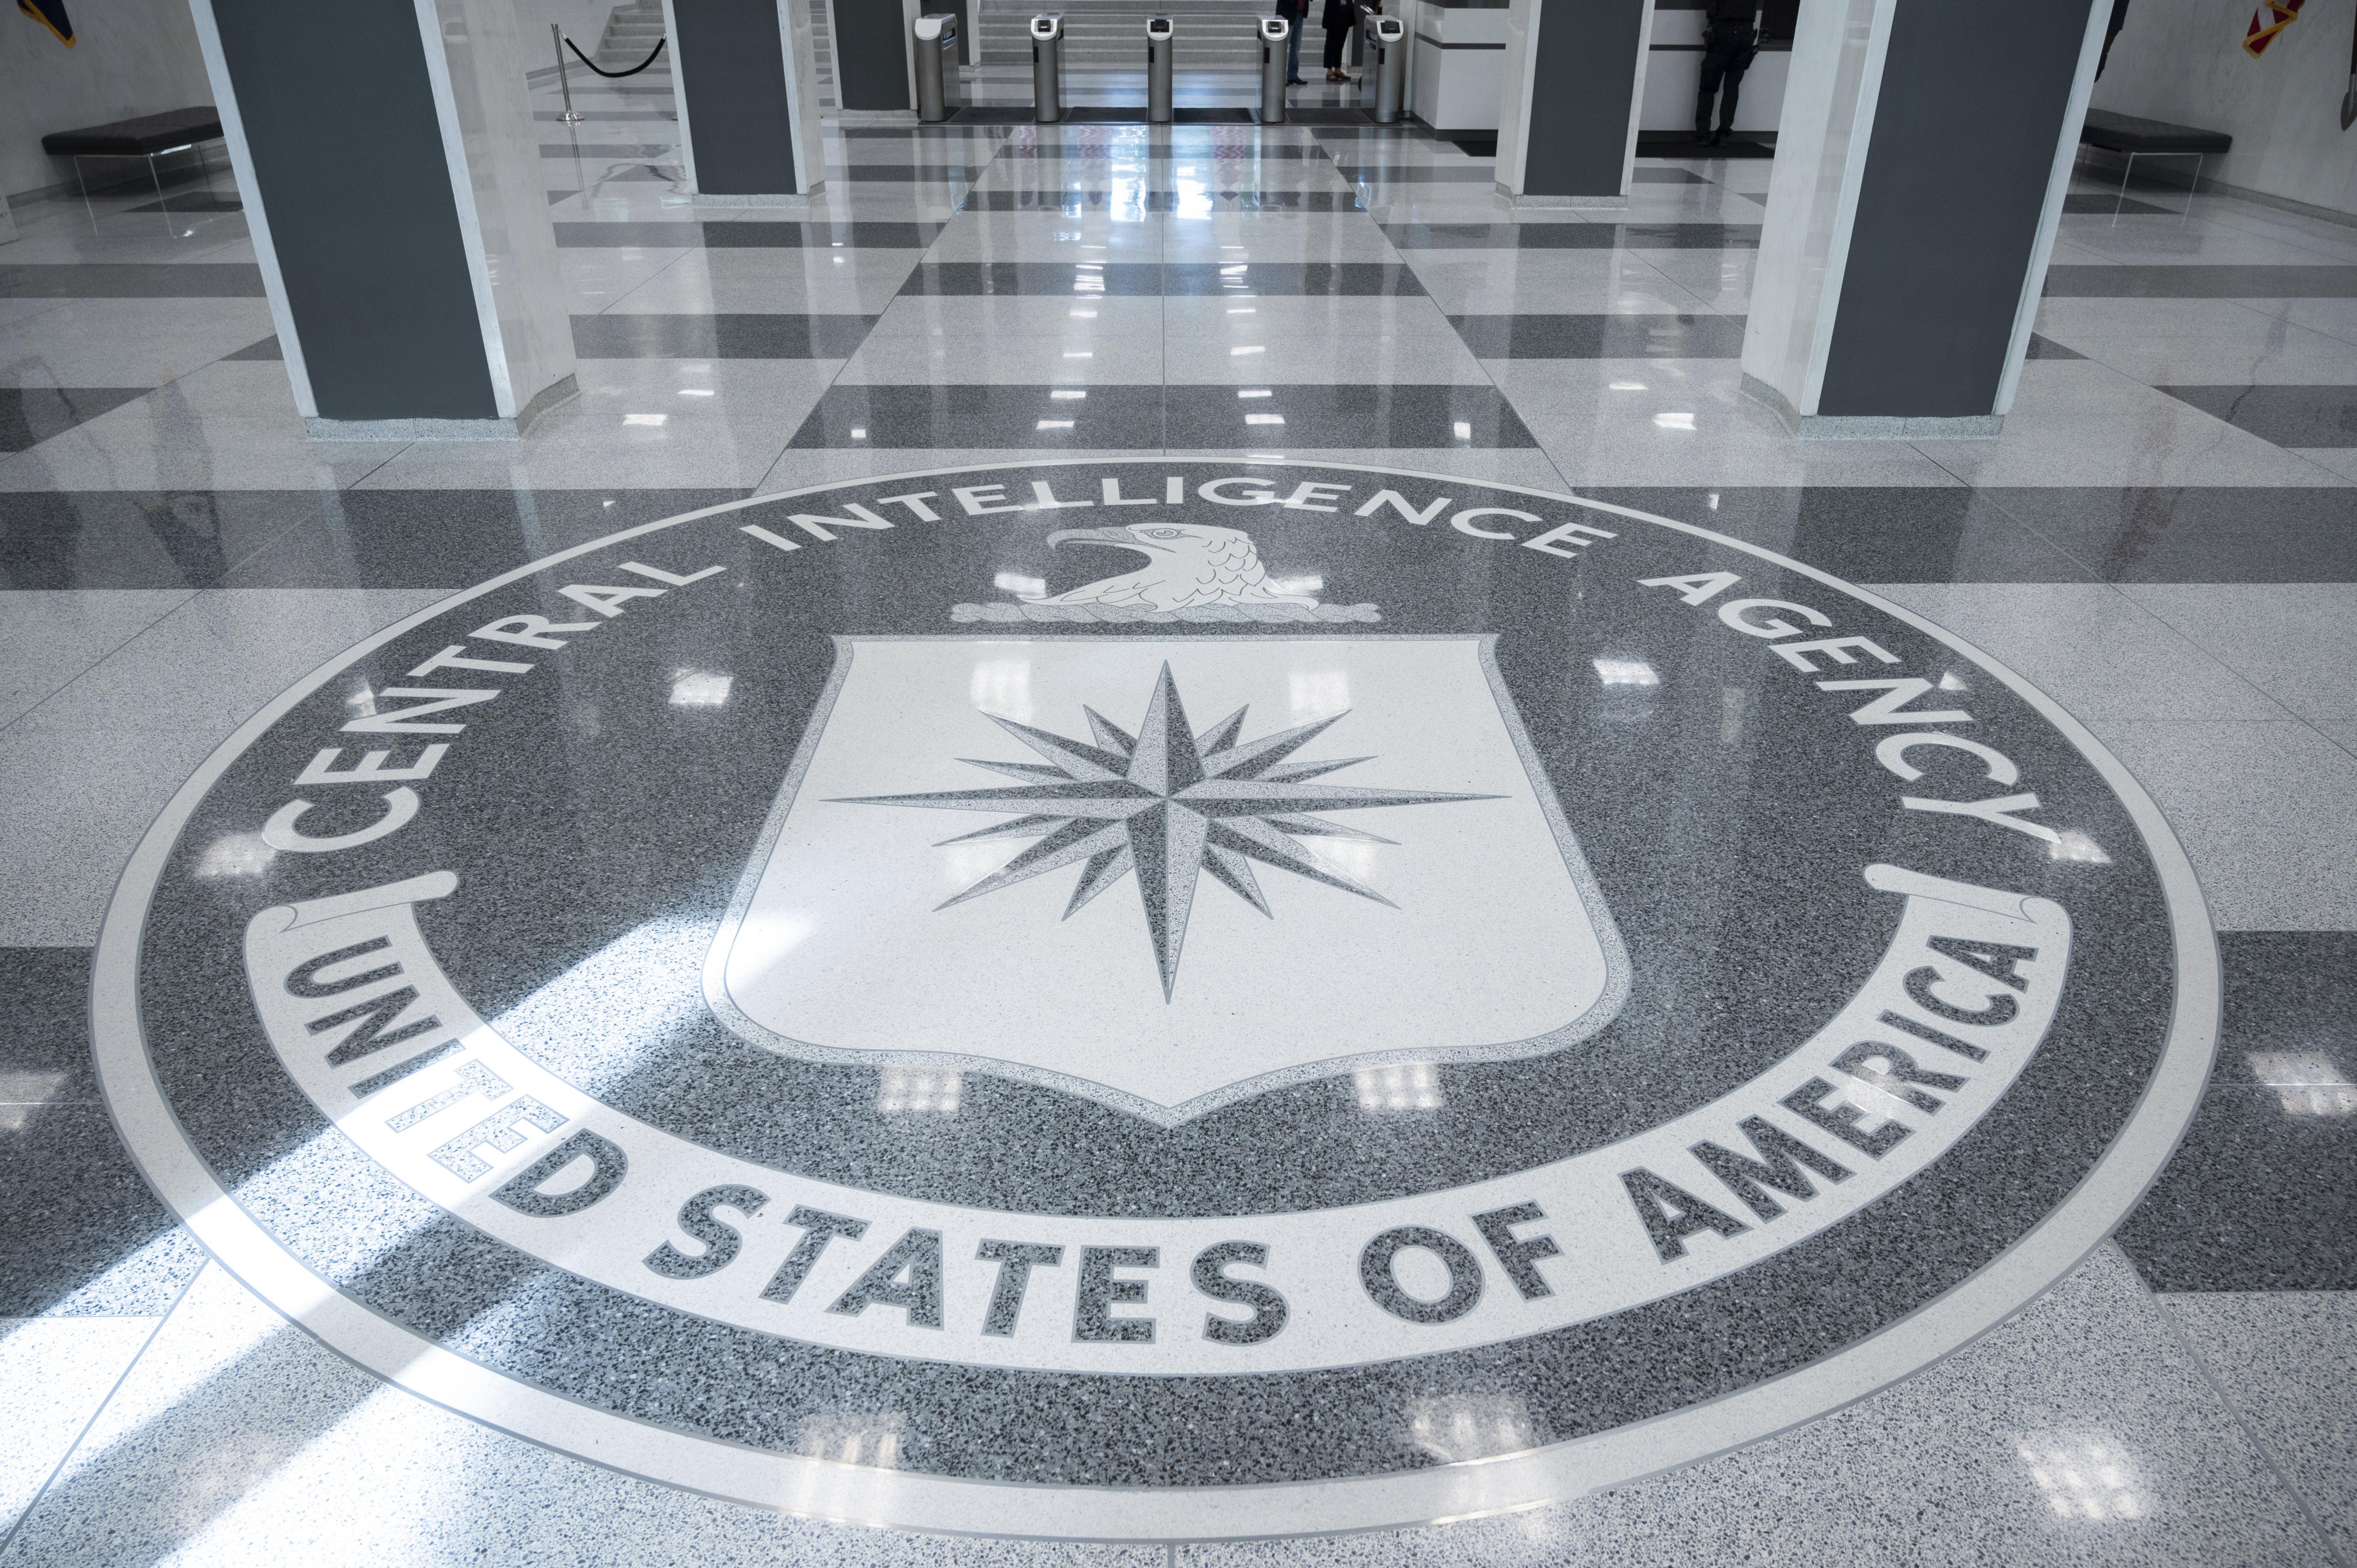 Revealed: Senate report contains new details on CIA black sites